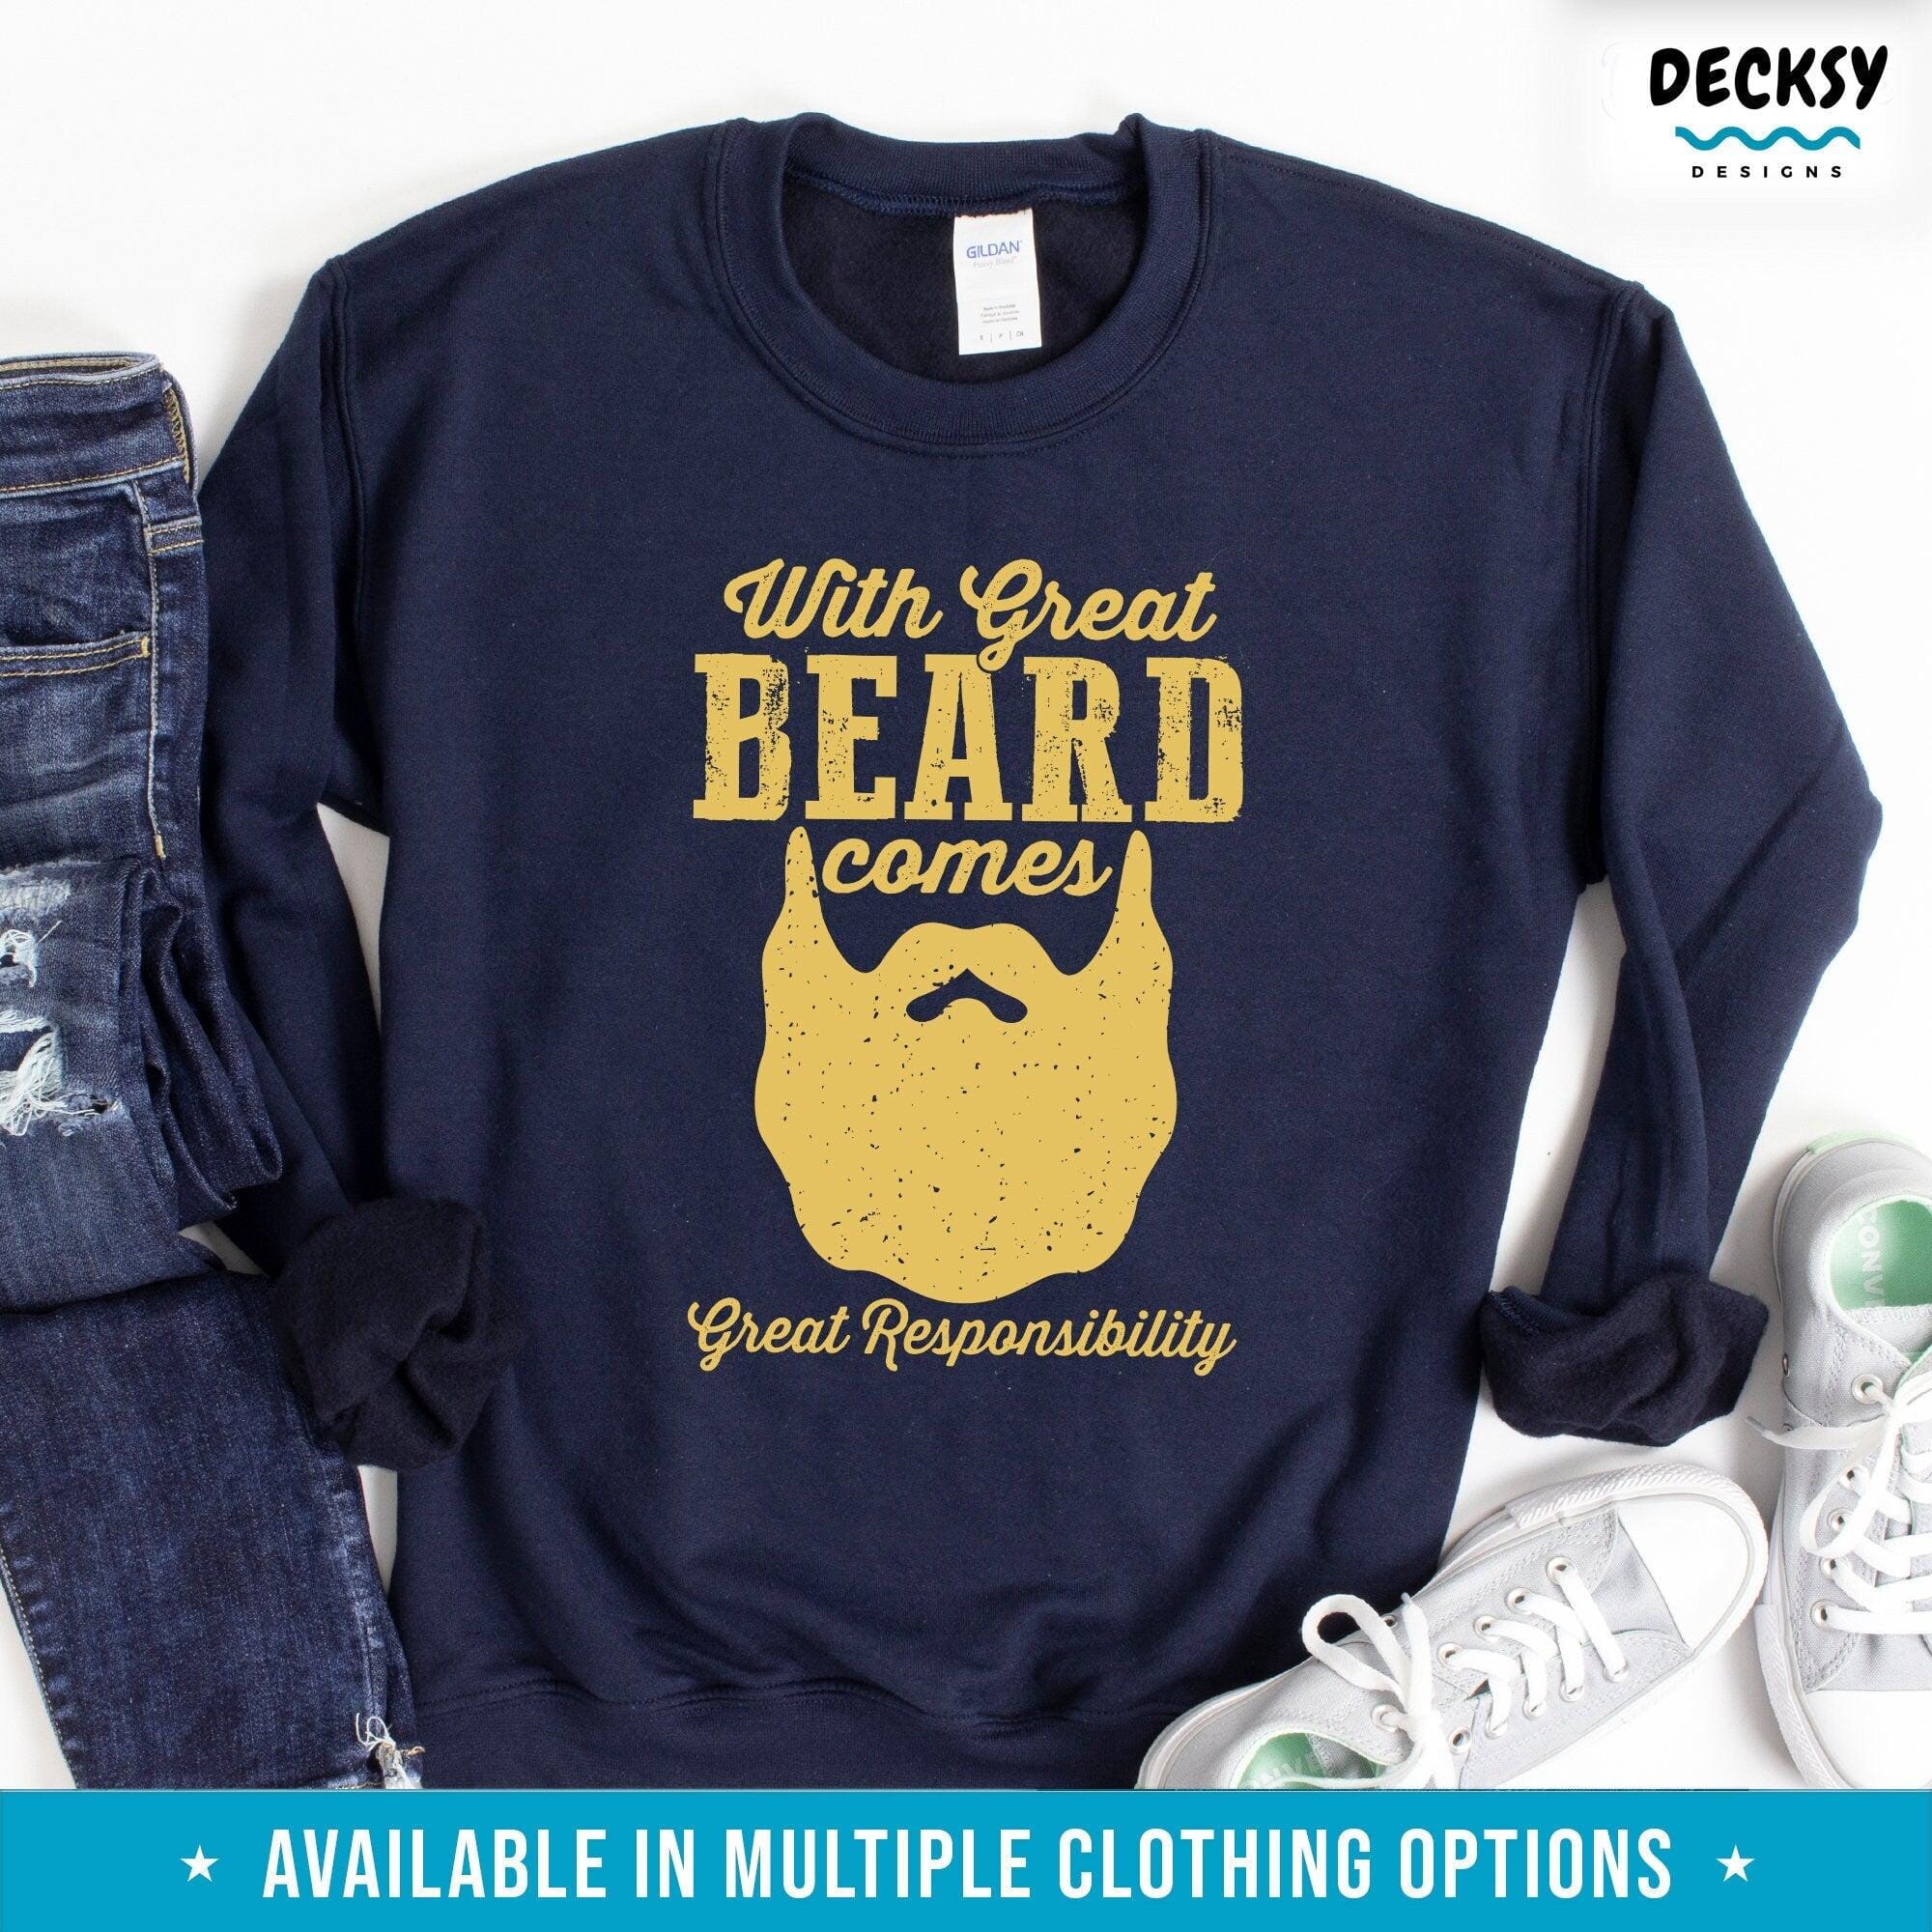 Funny Beard Shirt, Bearded Man Gift-Clothing:Gender-Neutral Adult Clothing:Tops & Tees:T-shirts:Graphic Tees-DecksyDesigns